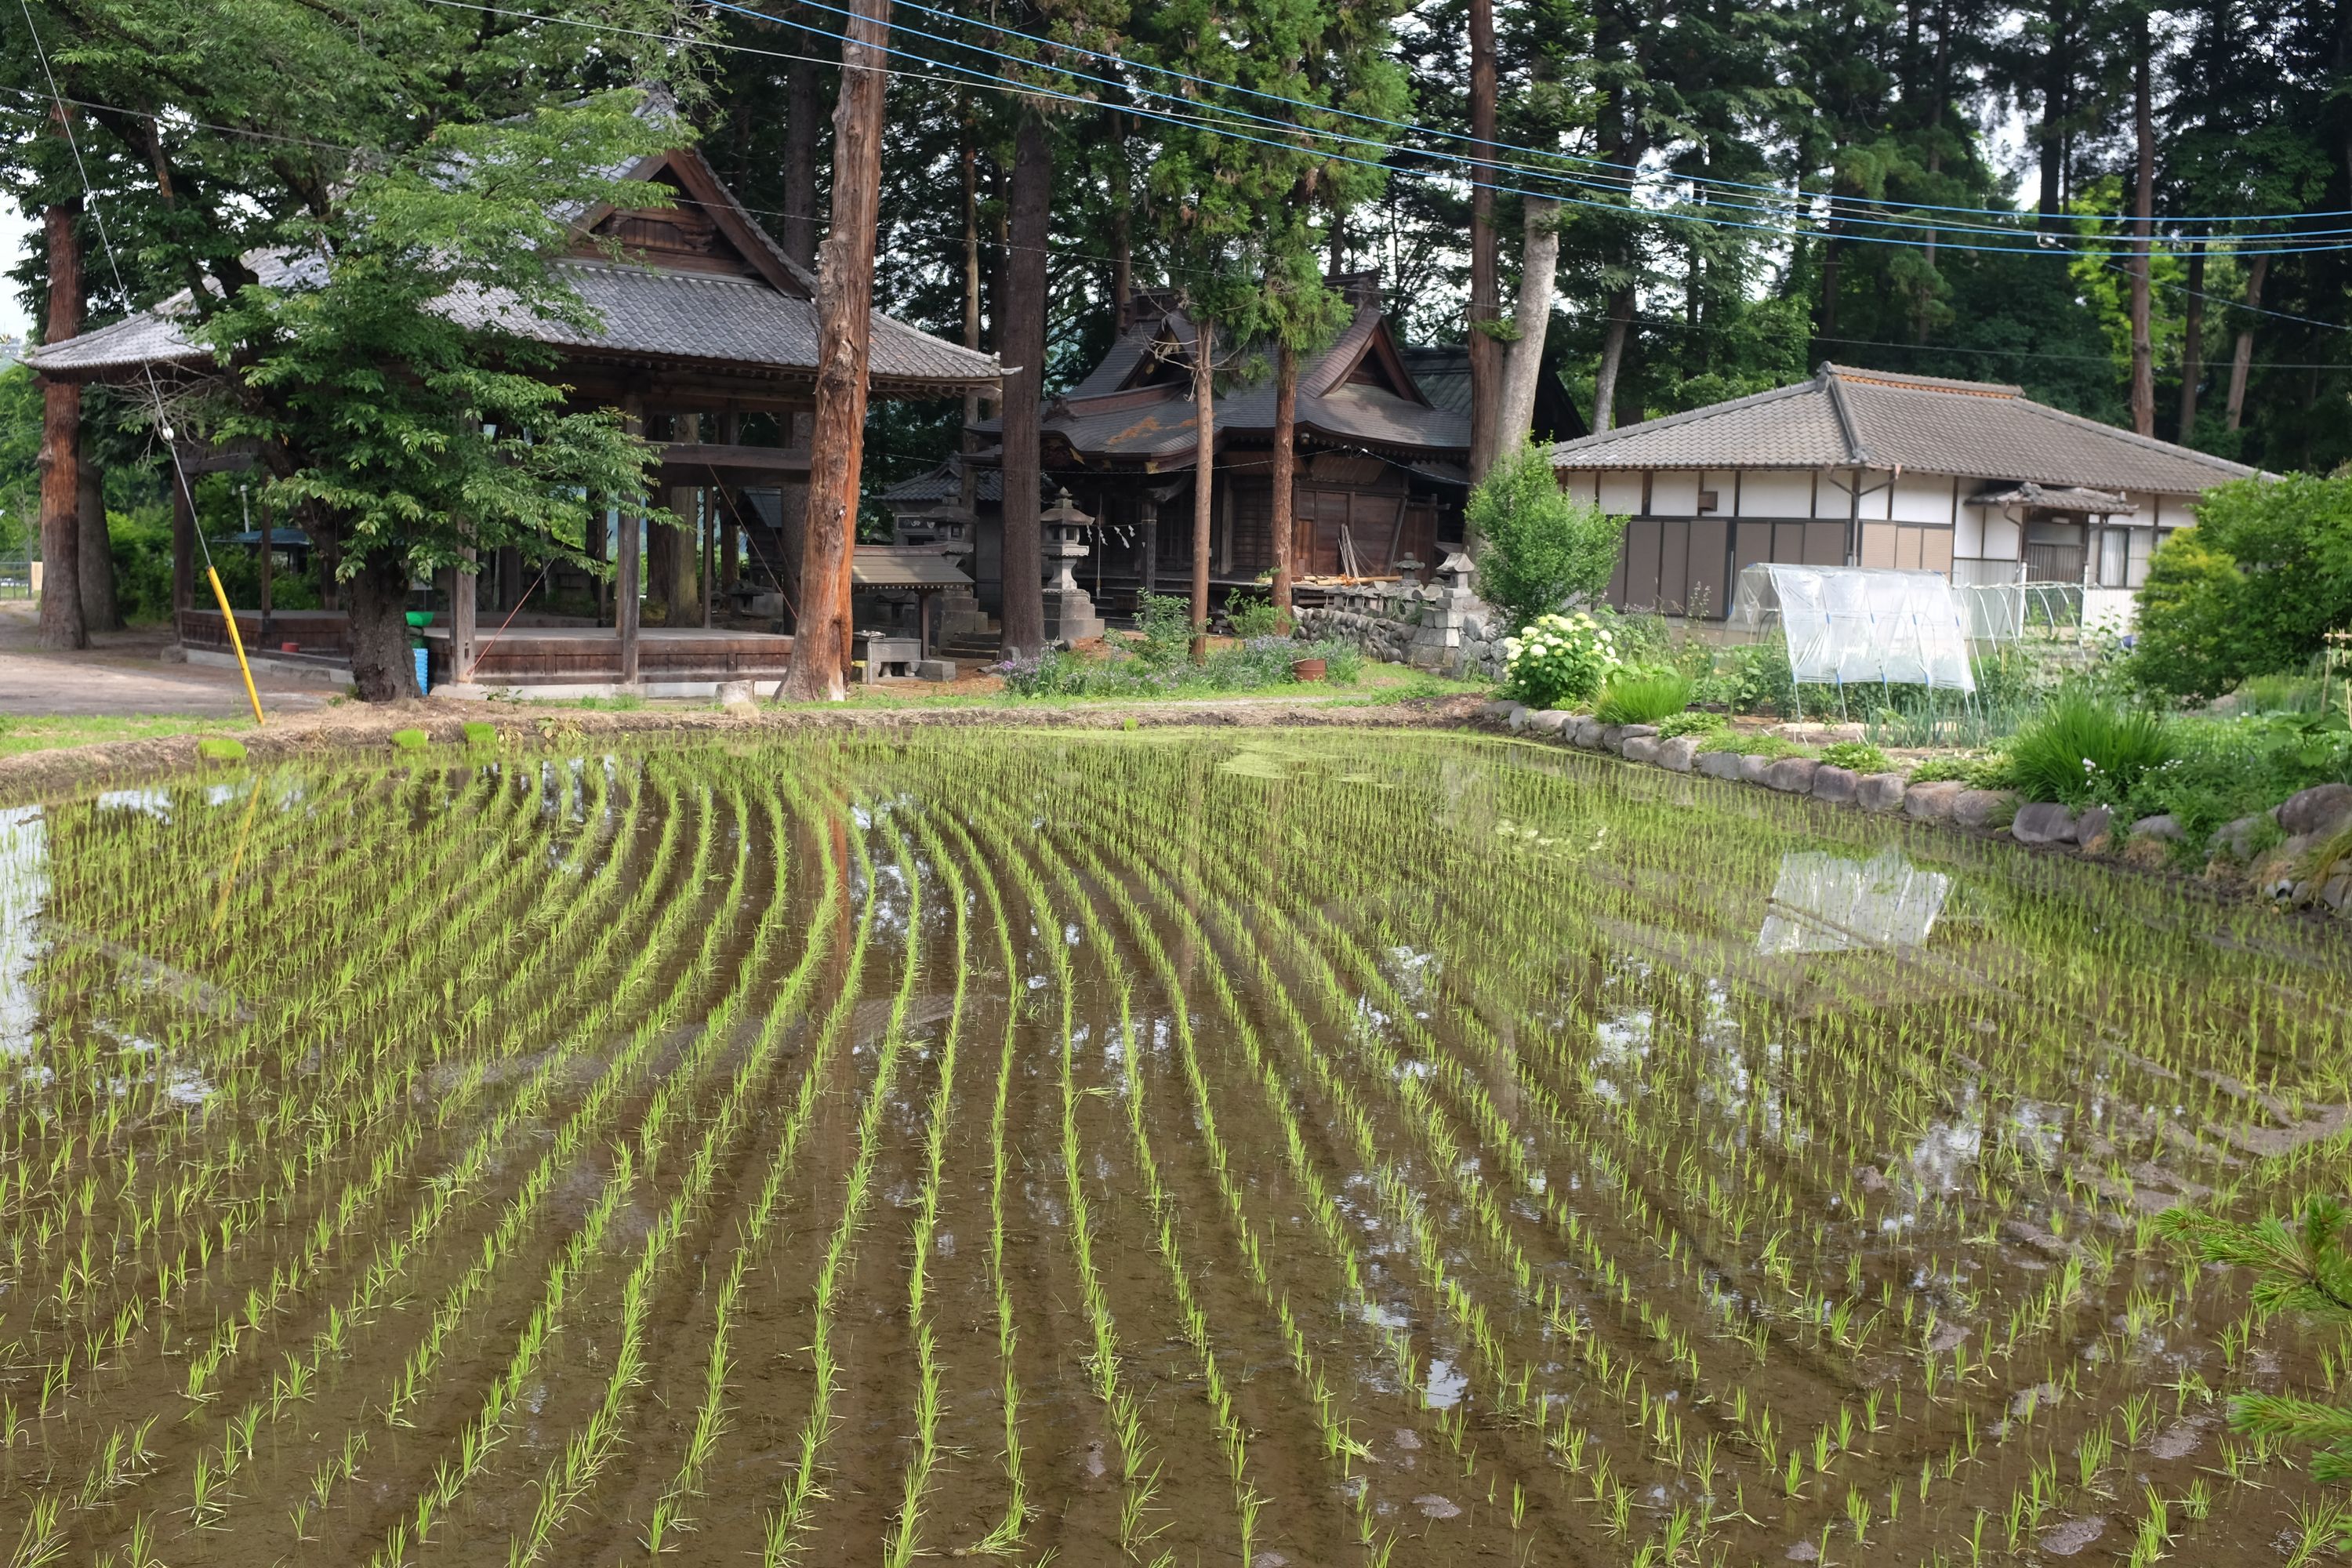 A Japanese shrine behind a sprouting ricefield.